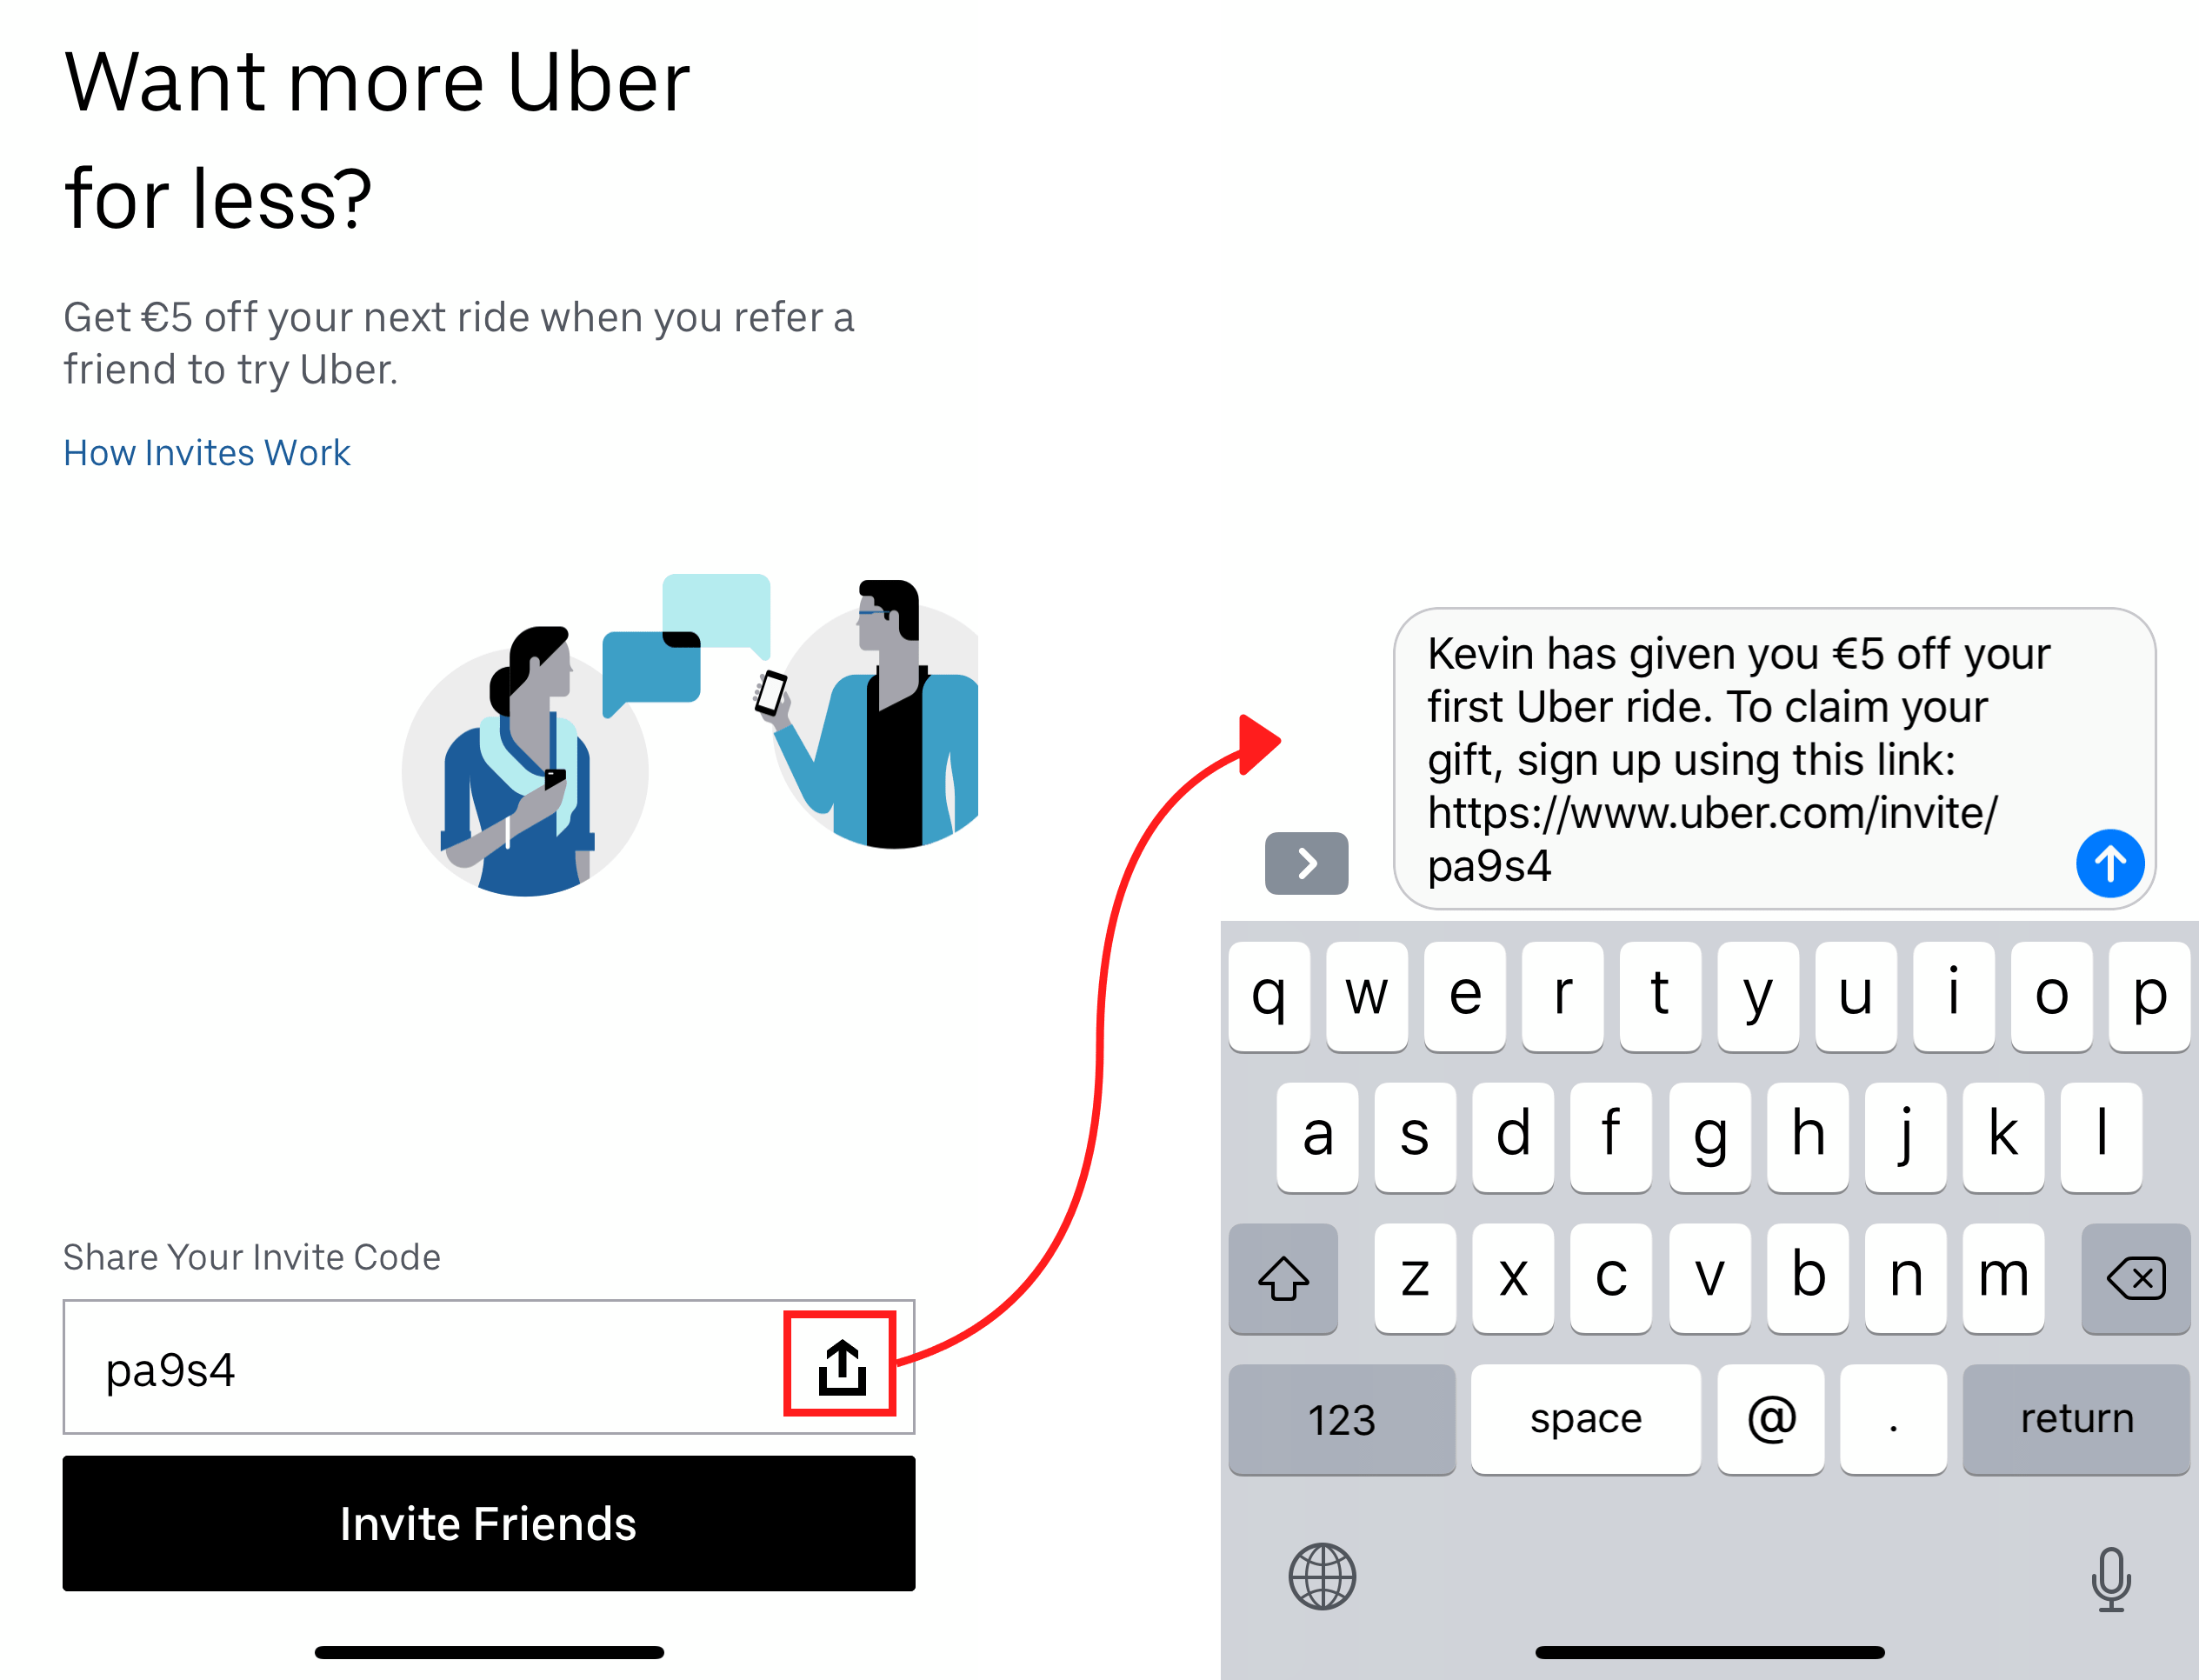 Uber pre-filled invites with promo code when you share the app